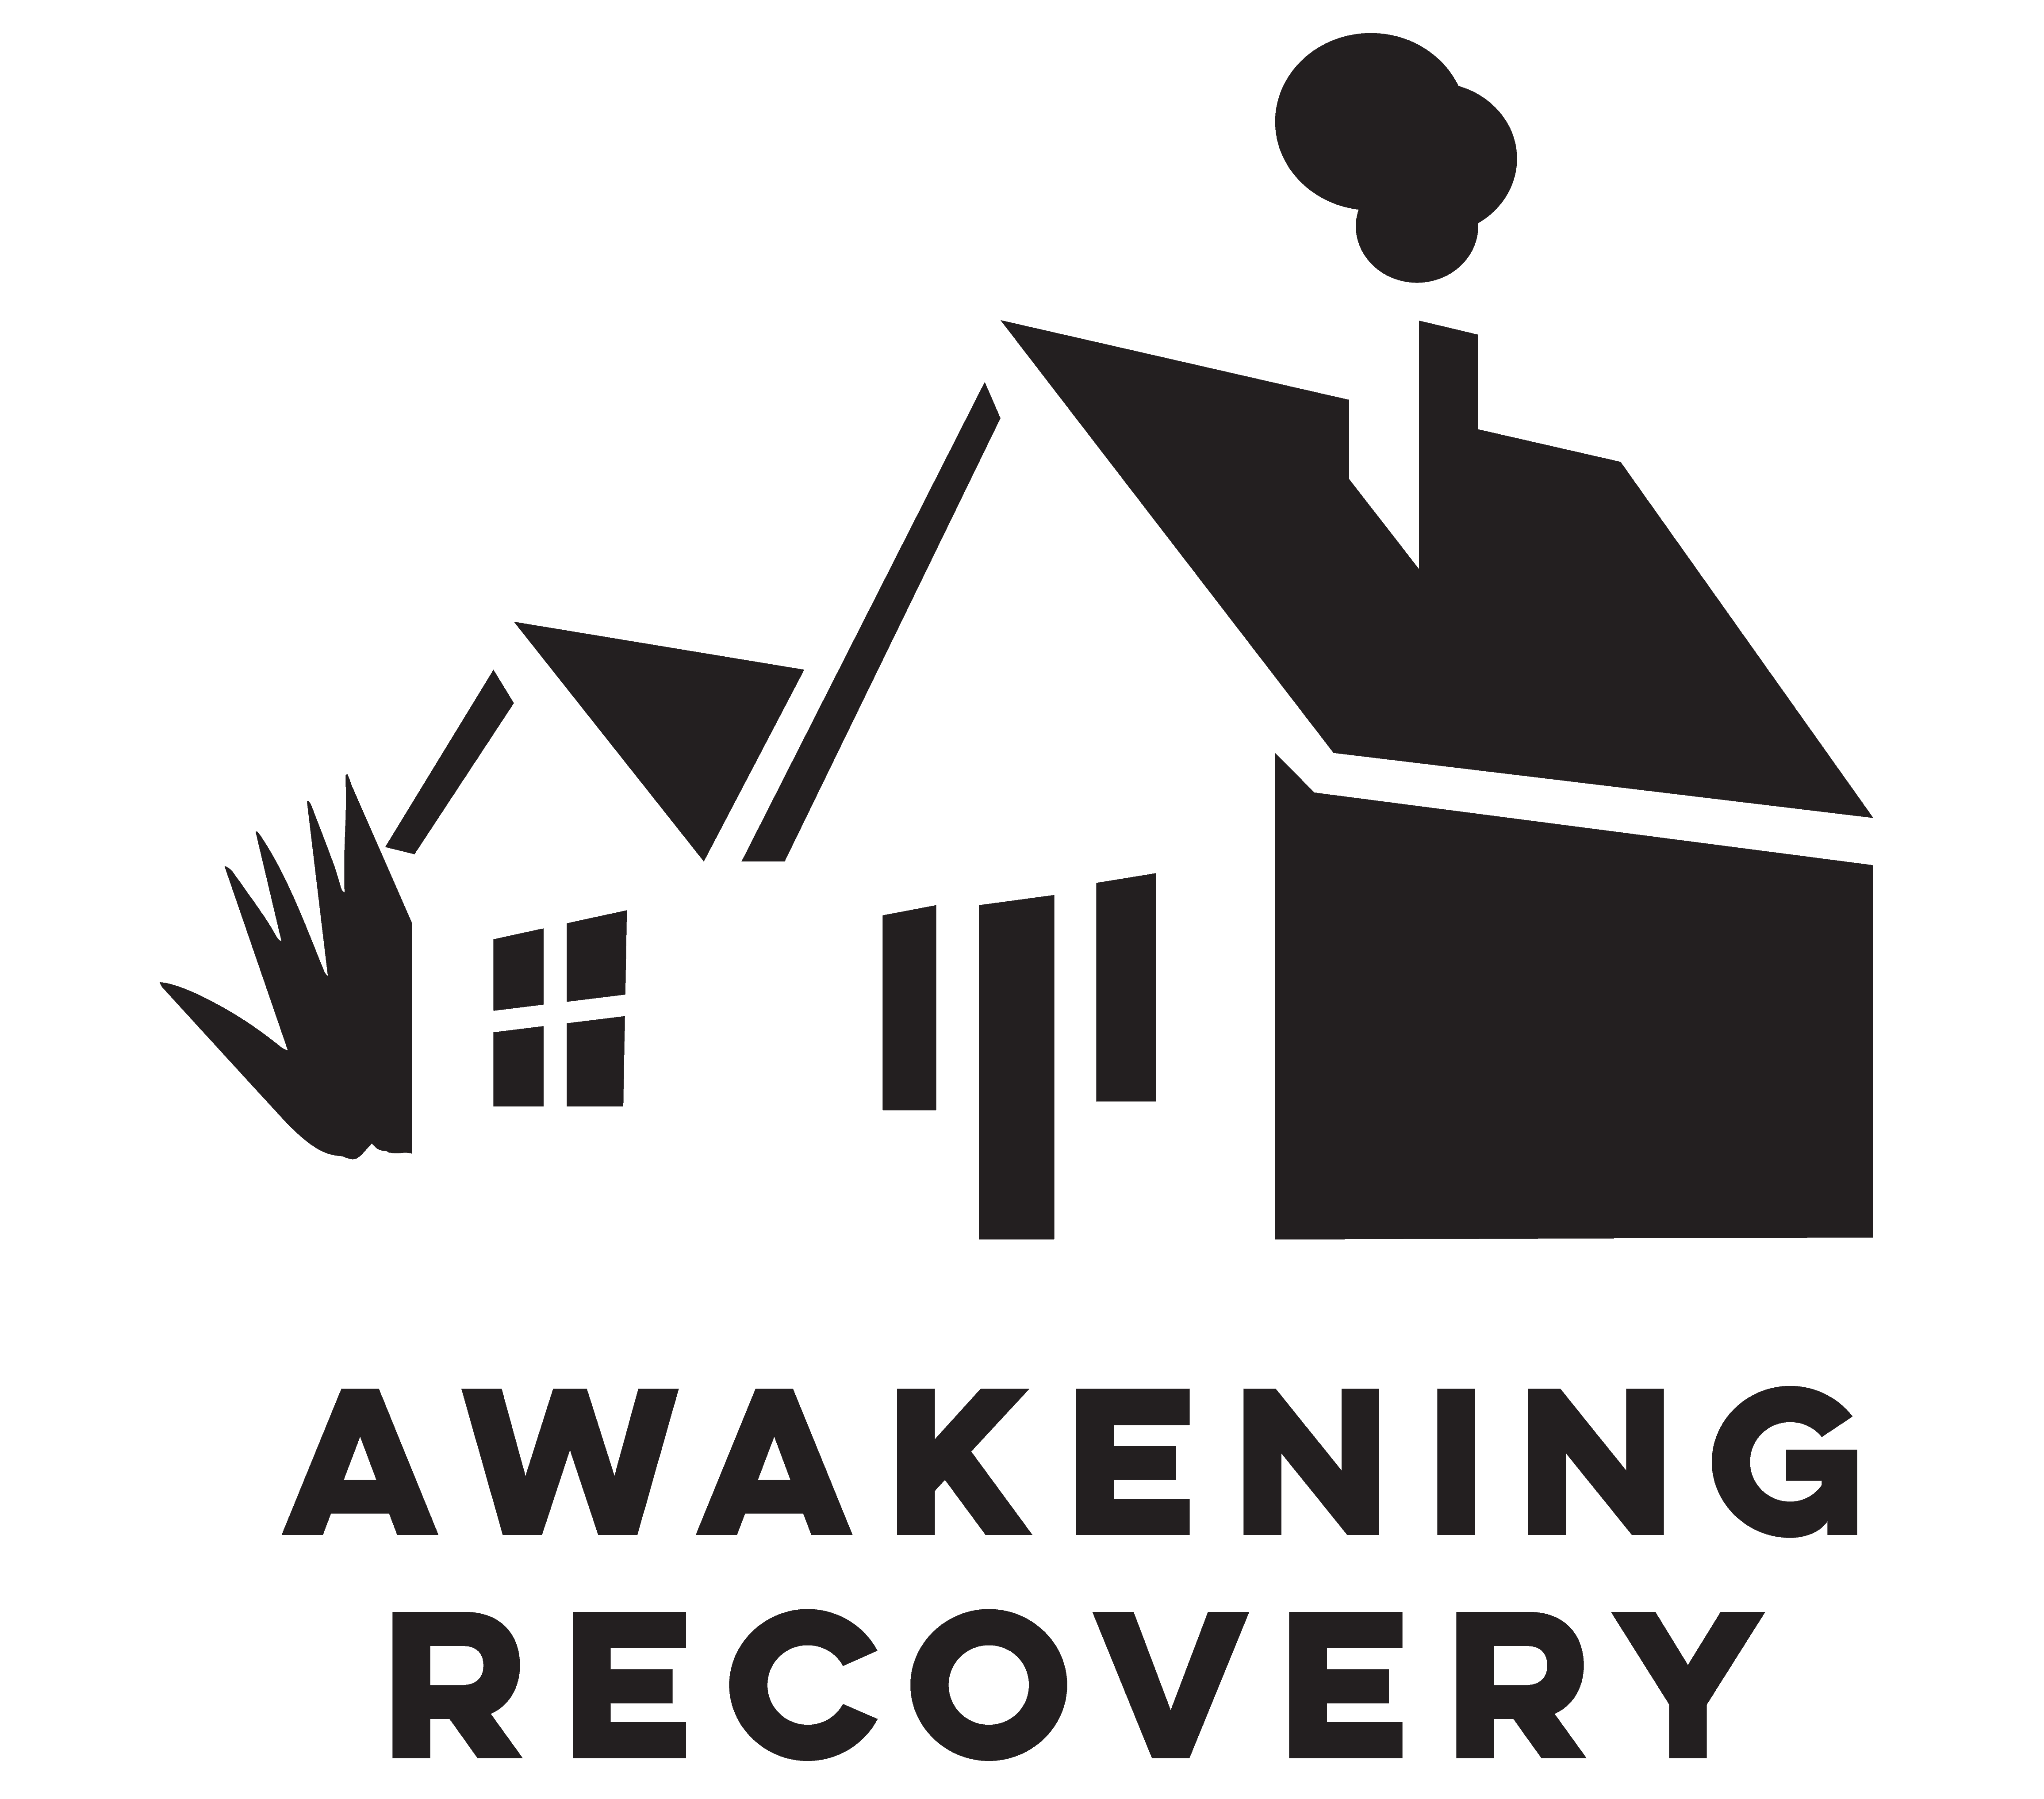 You are currently viewing Awakening Recovery 990 for 2022